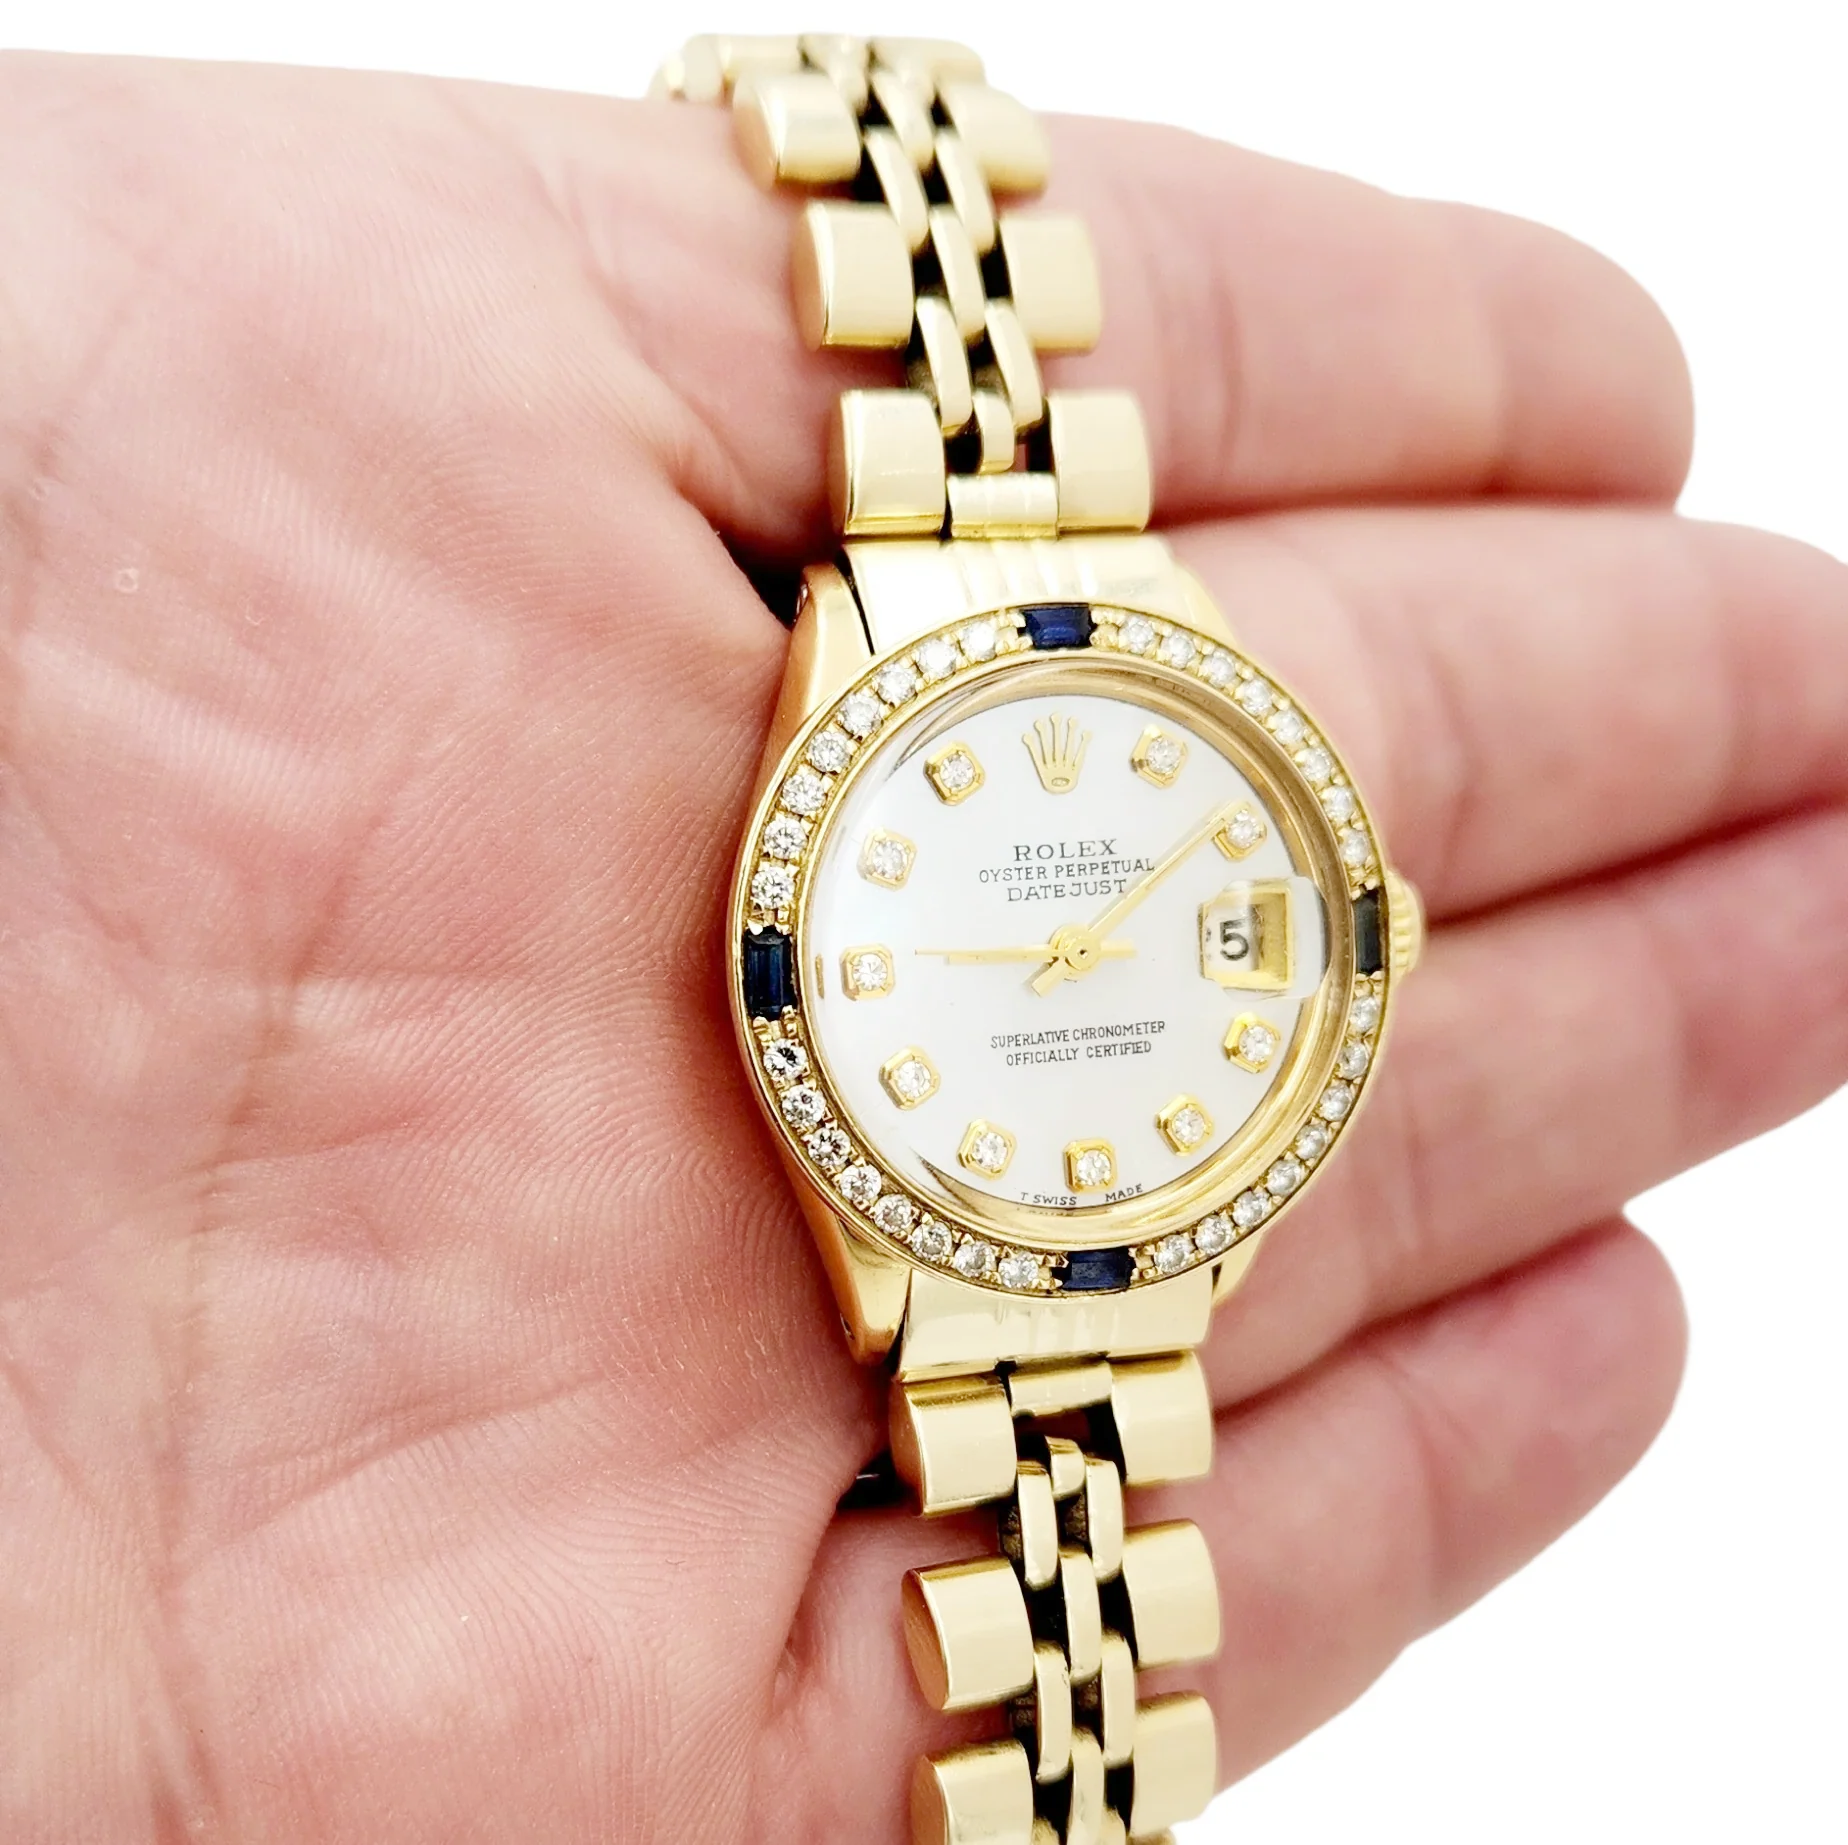 Ladies Rolex DateJust 26mm Vintage Solid 14K Yellow Gold Watch with Mother of Pearl Diamond Dial and Blue Sapphire Diamond Bezel. (Pre-Owned 6517)